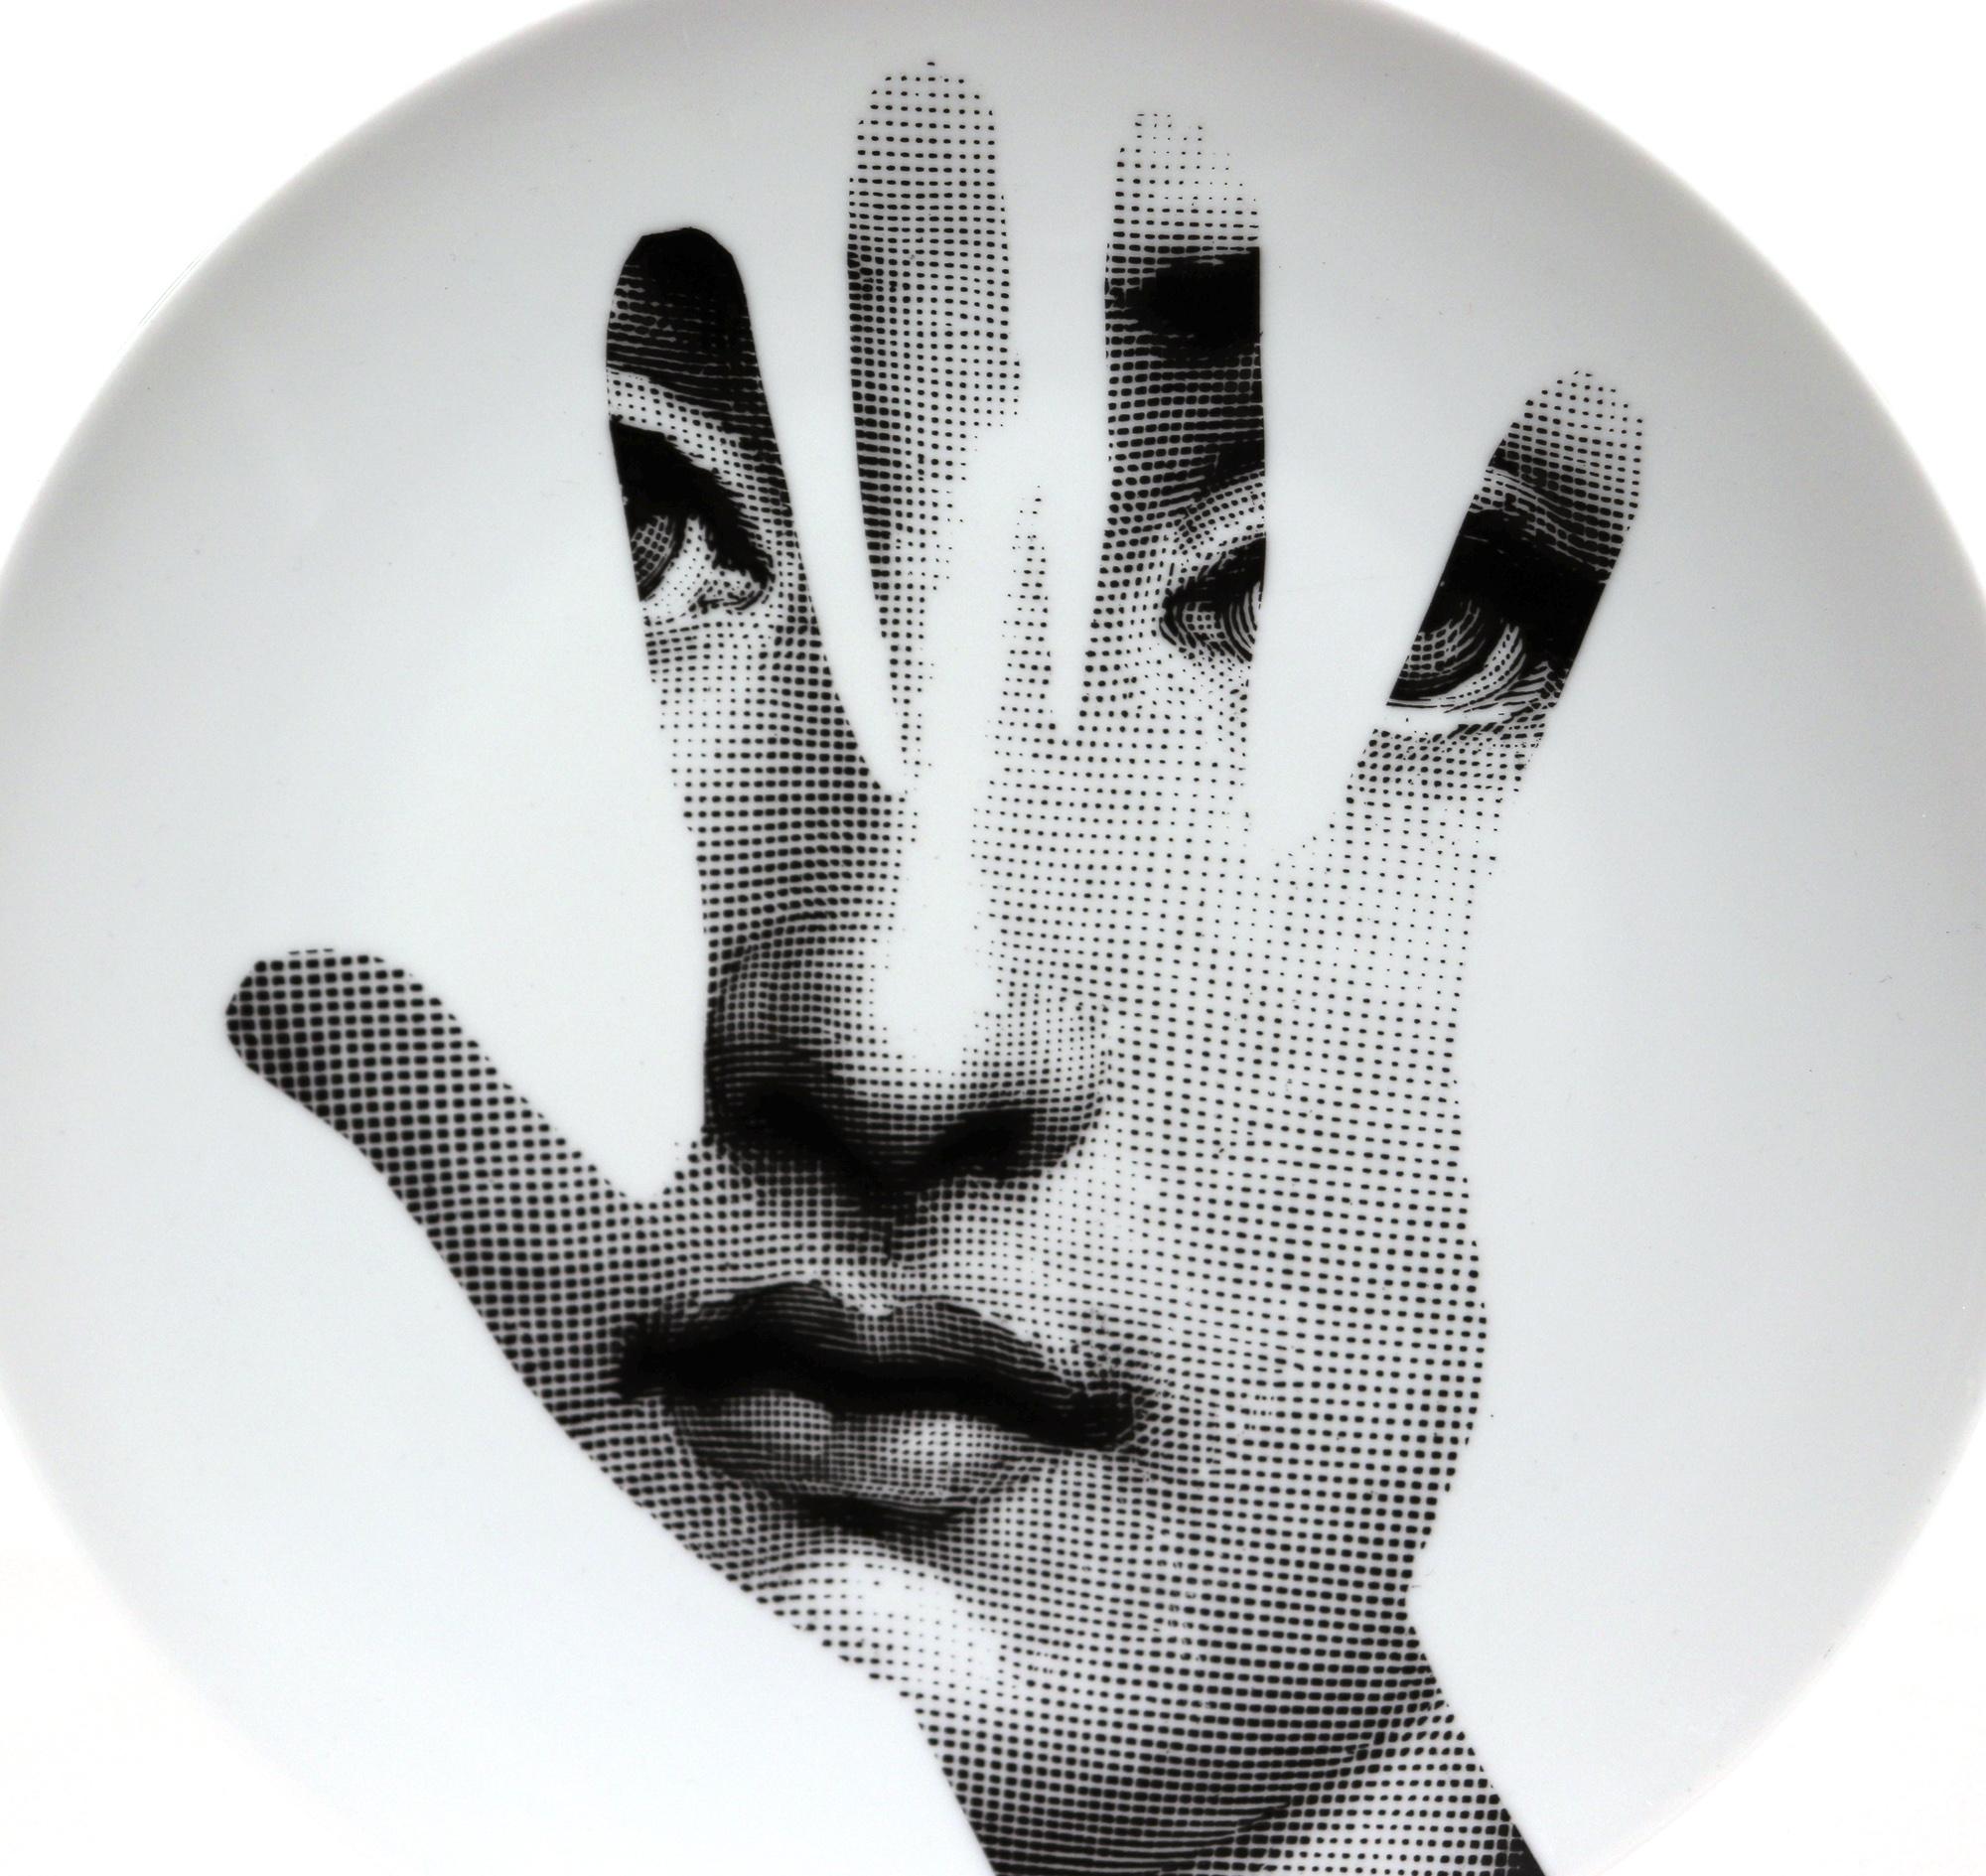 Vintage Fornasetti porcelain themes & variation plate #15,
The Hand,
Barnaba Fornasetti, Fornasetti Studio.

The Surreal Fornasetti porcelain plate in the Themes & Variation pattern depicts the face of Lina Cavalieri, Piero Fornasetti's muse